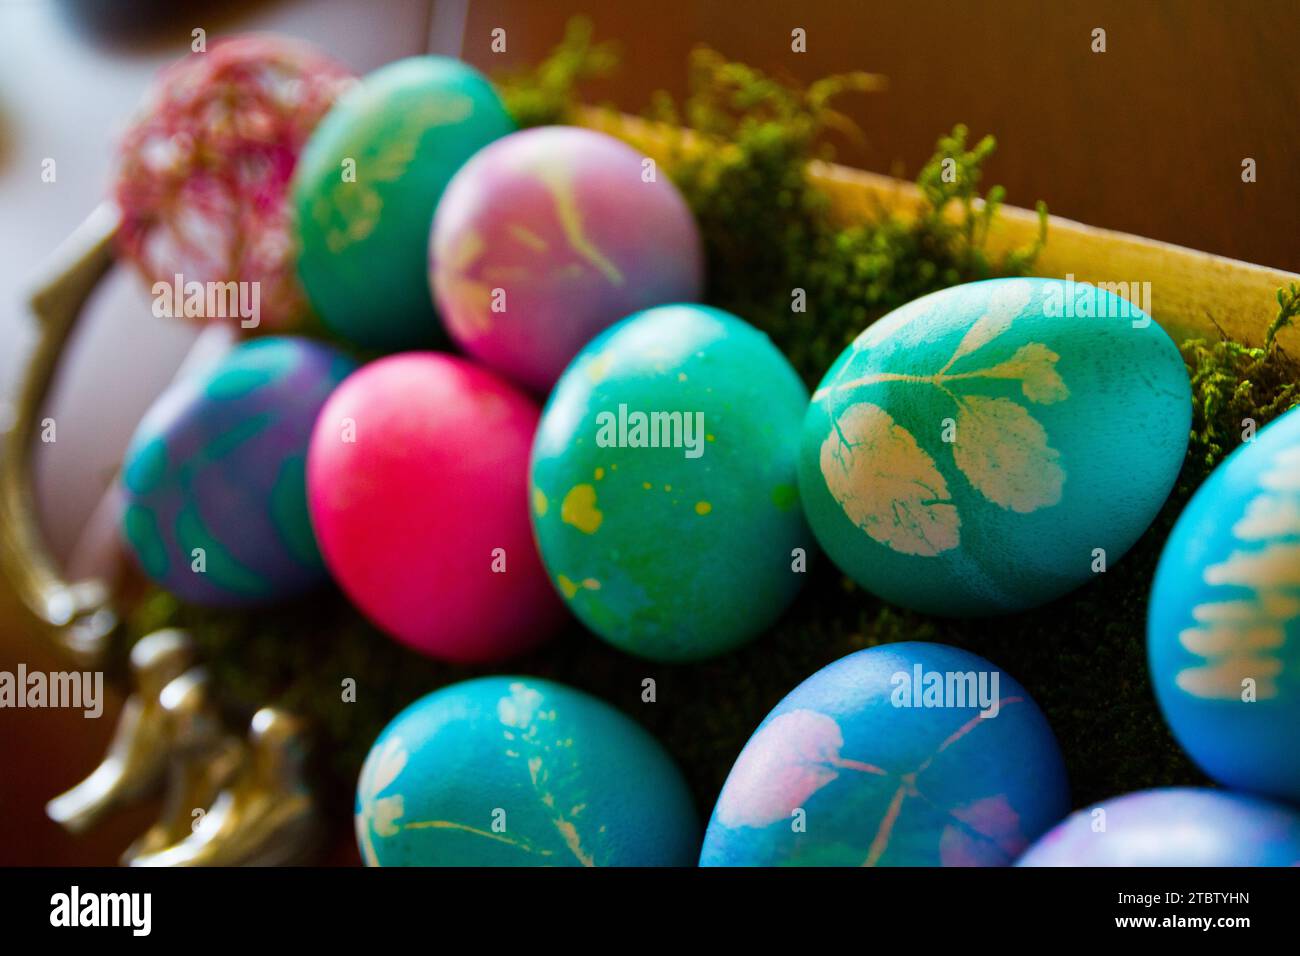 Colorful Easter Eggs in Moss with Botanical Prints Close-Up Stock Photo